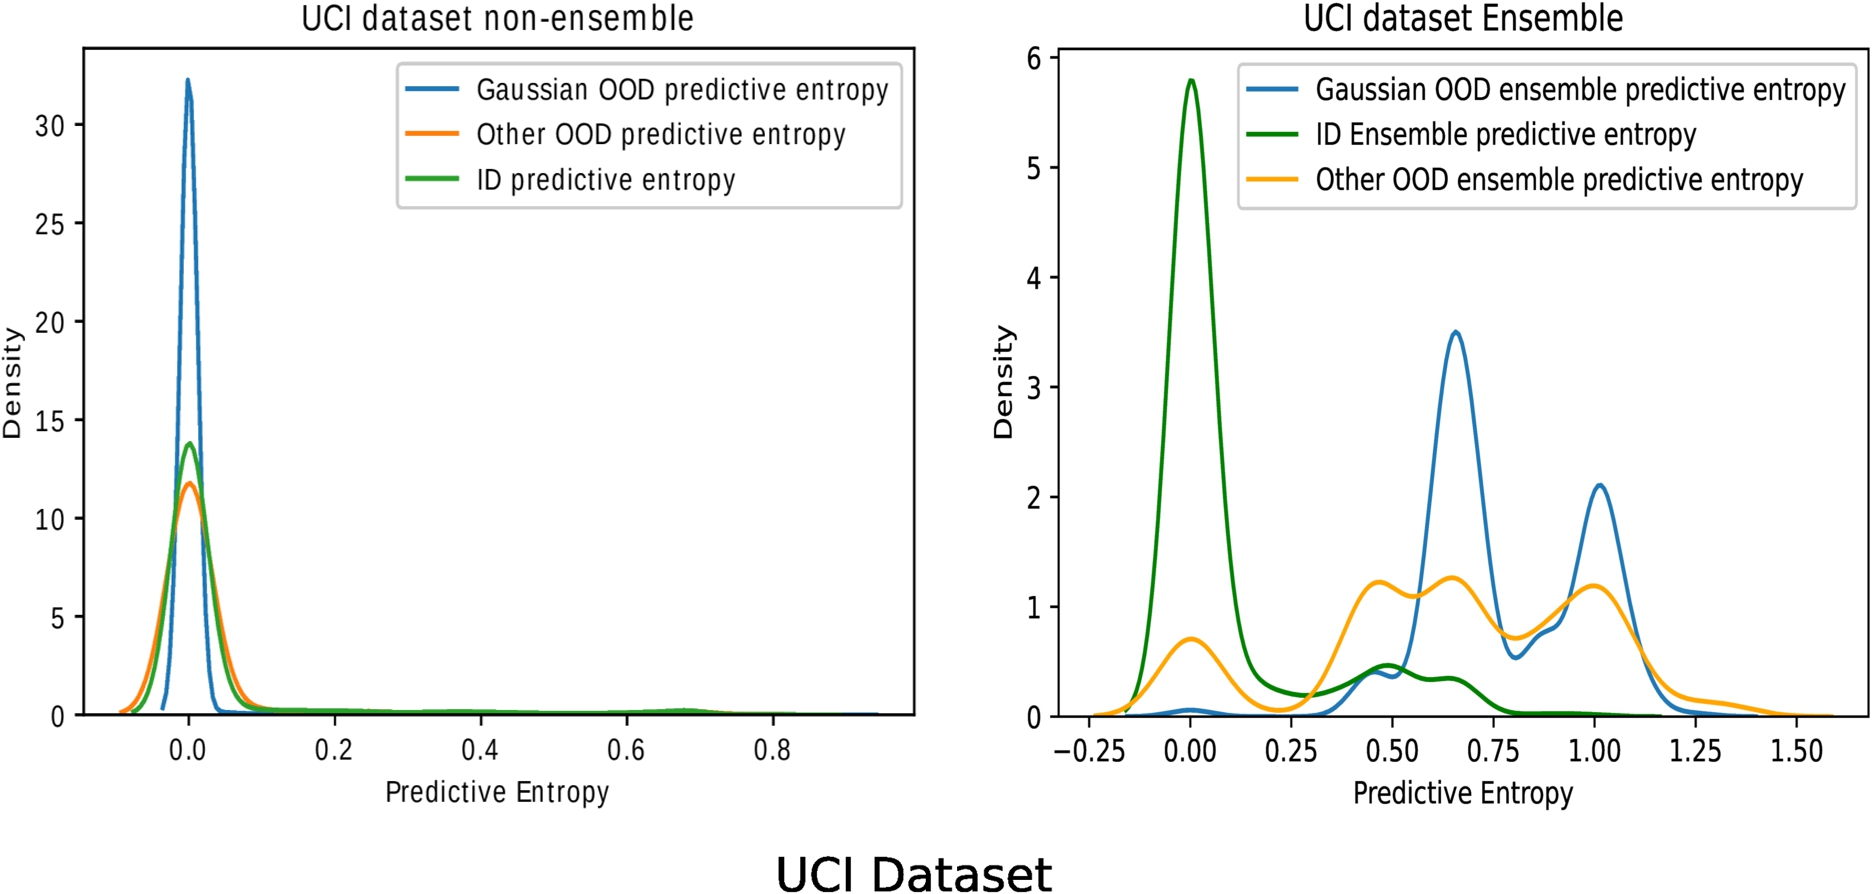 Comparing OOD detection of a single model against Deep time ensembles. The training dataset consists of dynamic activities from UCI, and the OOD is Jogging from the Motion-Sense dataset (other OOD in image) and random Gaussian noise.